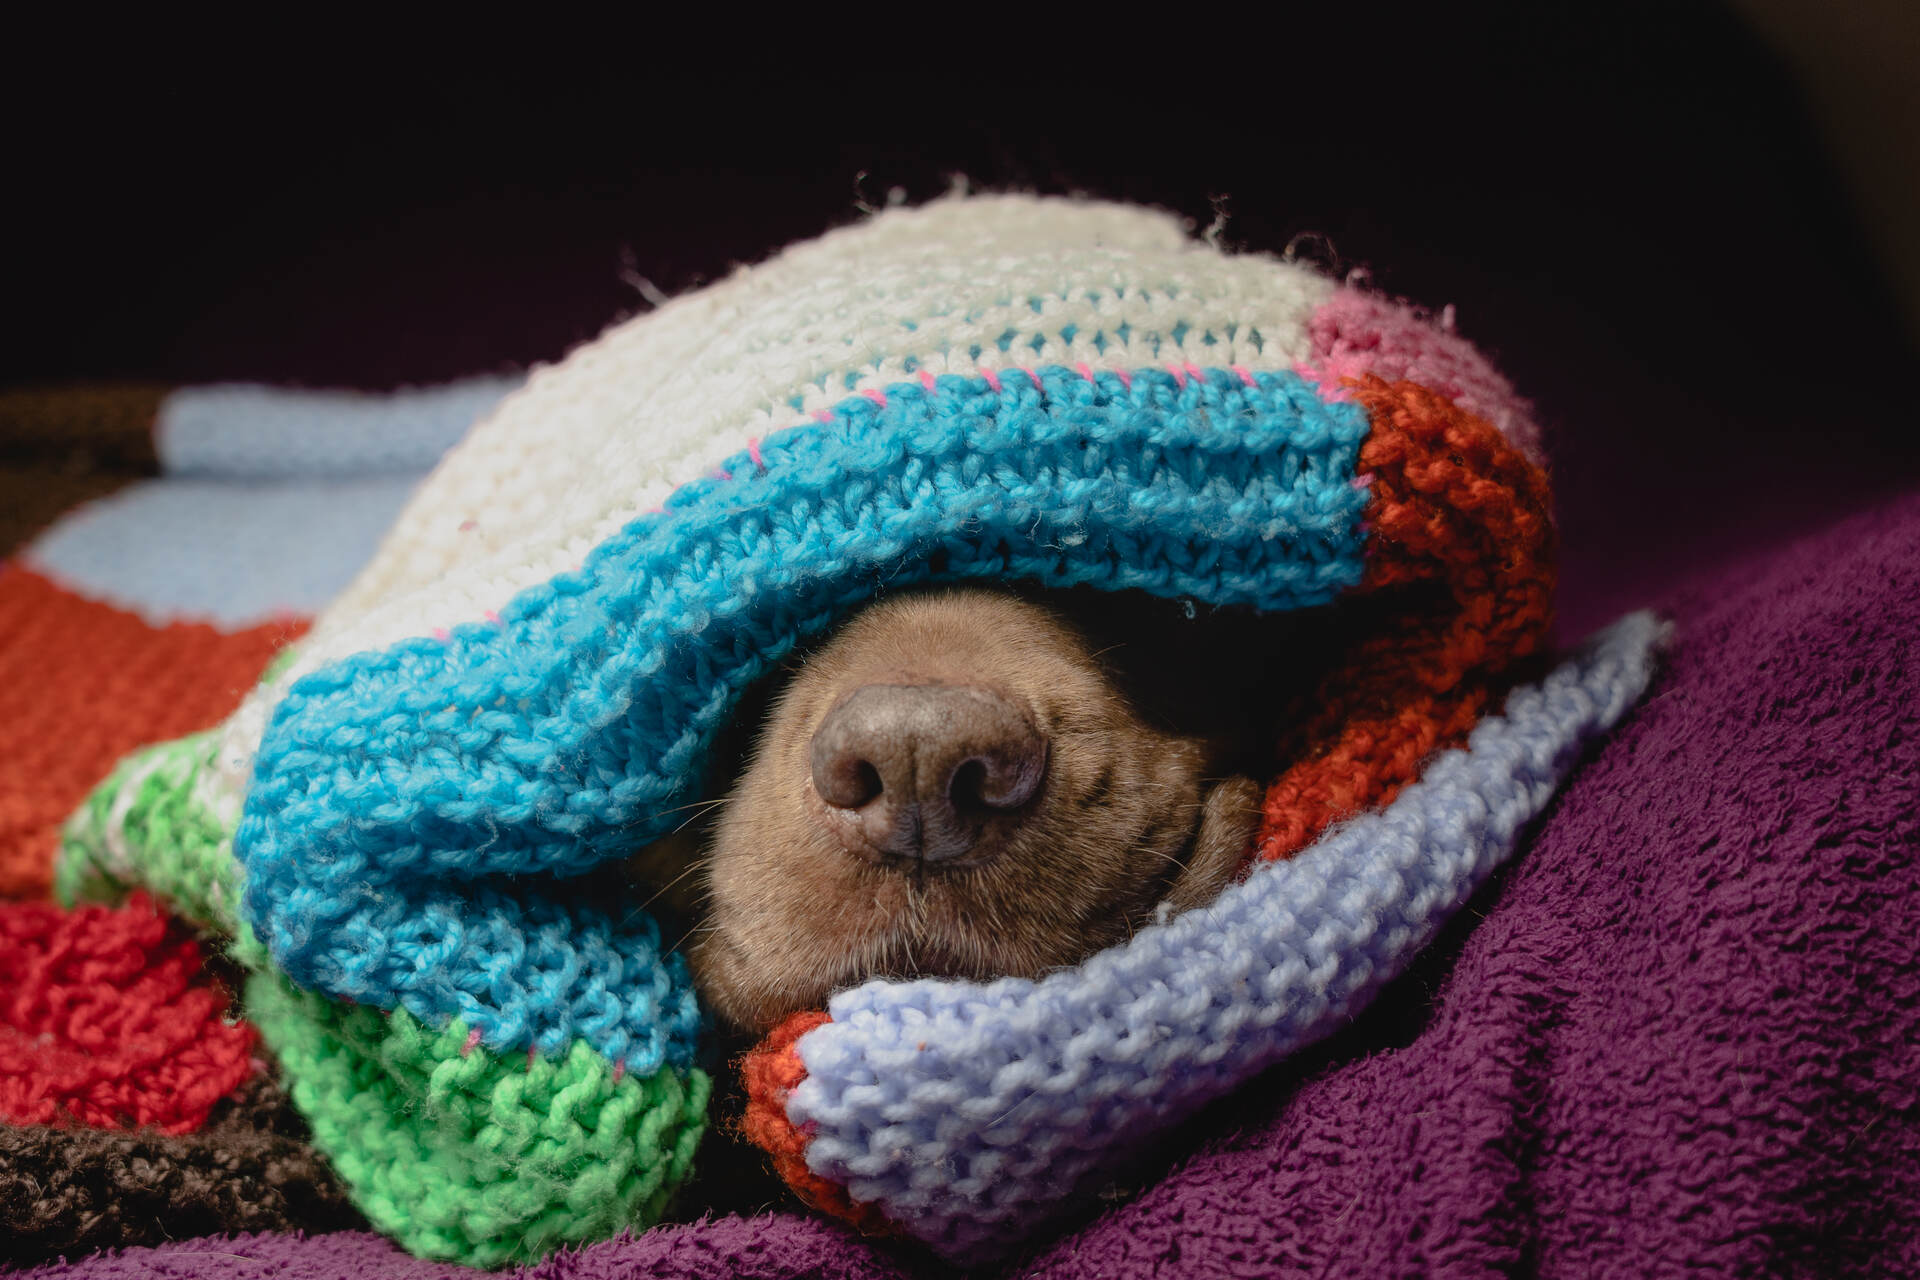 A dog lying in bed wrapped up in a colorful blanket